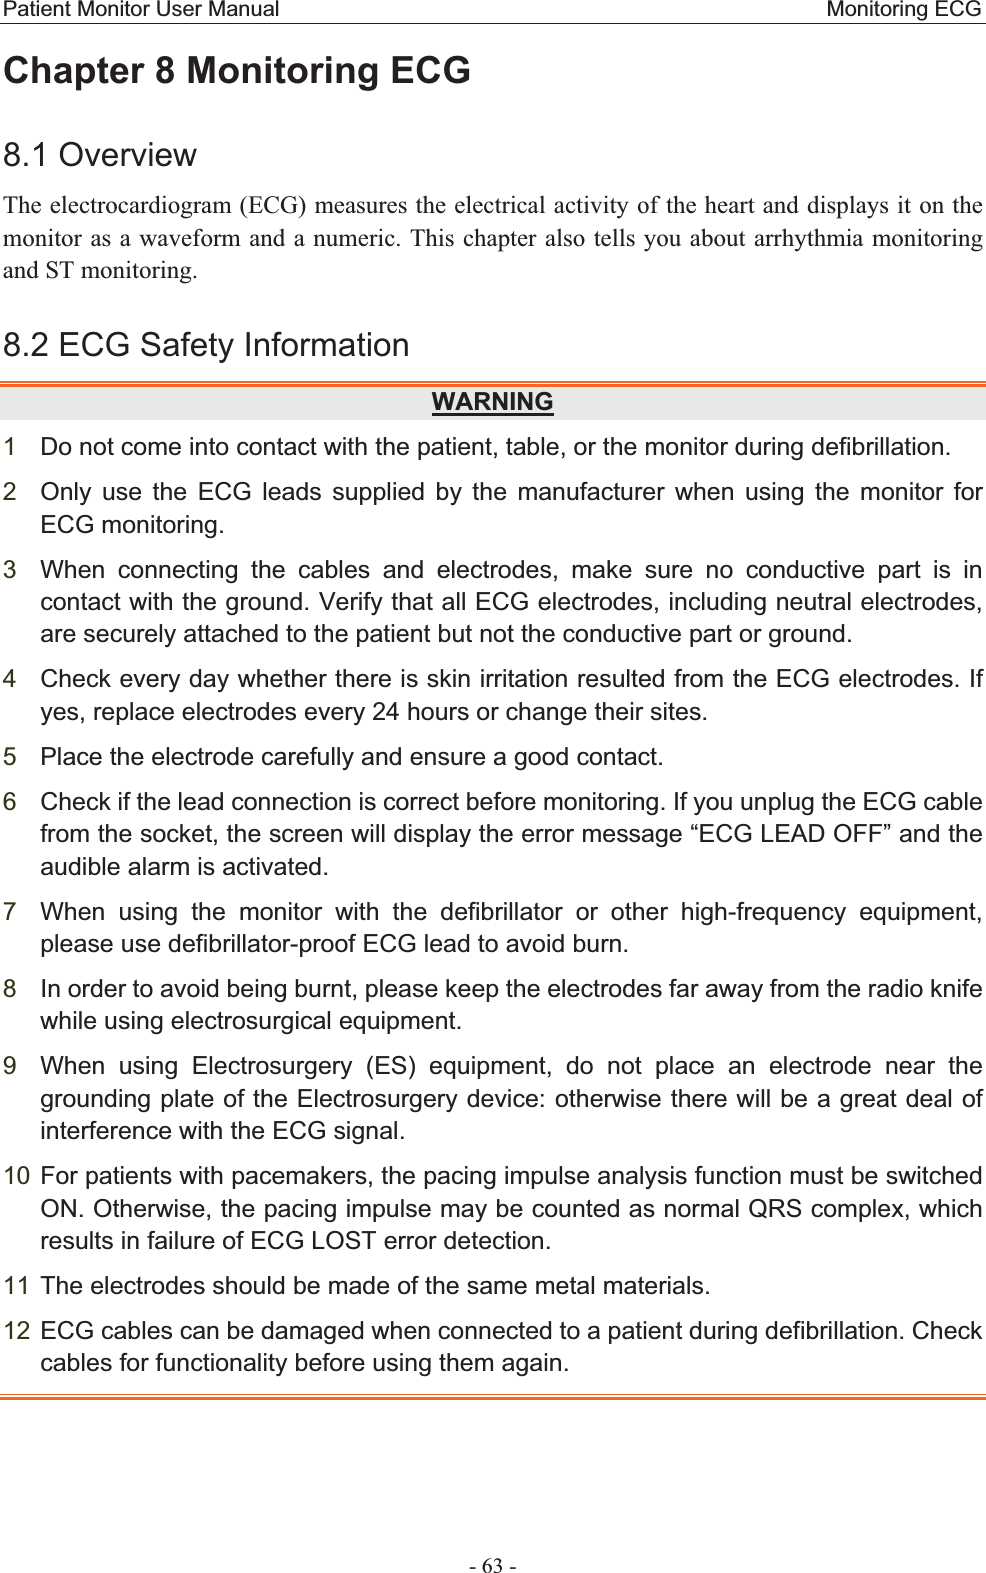 Patient Monitor User Manual                                                  Monitoring ECG  - 63 - Chapter 8 Monitoring ECG   8.1 OverviewThe electrocardiogram (ECG) measures the electrical activity of the heart and displays it on the monitor as a waveform and a numeric. This chapter also tells you about arrhythmia monitoring and ST monitoring.   8.2 ECG Safety Information WARNING1Do not come into contact with the patient, table, or the monitor during defibrillation. 2Only use the ECG leads supplied by the manufacturer when using the monitor for ECG monitoring.   3When connecting the cables and electrodes, make sure no conductive part is in contact with the ground. Verify that all ECG electrodes, including neutral electrodes, are securely attached to the patient but not the conductive part or ground. 4Check every day whether there is skin irritation resulted from the ECG electrodes. If yes, replace electrodes every 24 hours or change their sites. 5Place the electrode carefully and ensure a good contact. 6Check if the lead connection is correct before monitoring. If you unplug the ECG cable from the socket, the screen will display the error message “ECG LEAD OFF” and the audible alarm is activated. 7When using the monitor with the defibrillator or other high-frequency equipment, please use defibrillator-proof ECG lead to avoid burn. 8In order to avoid being burnt, please keep the electrodes far away from the radio knife while using electrosurgical equipment.   9When using Electrosurgery (ES) equipment, do not place an electrode near the grounding plate of the Electrosurgery device: otherwise there will be a great deal of interference with the ECG signal. 10 For patients with pacemakers, the pacing impulse analysis function must be switched ON. Otherwise, the pacing impulse may be counted as normal QRS complex, which results in failure of ECG LOST error detection. 11 The electrodes should be made of the same metal materials. 12 ECG cables can be damaged when connected to a patient during defibrillation. Check cables for functionality before using them again.